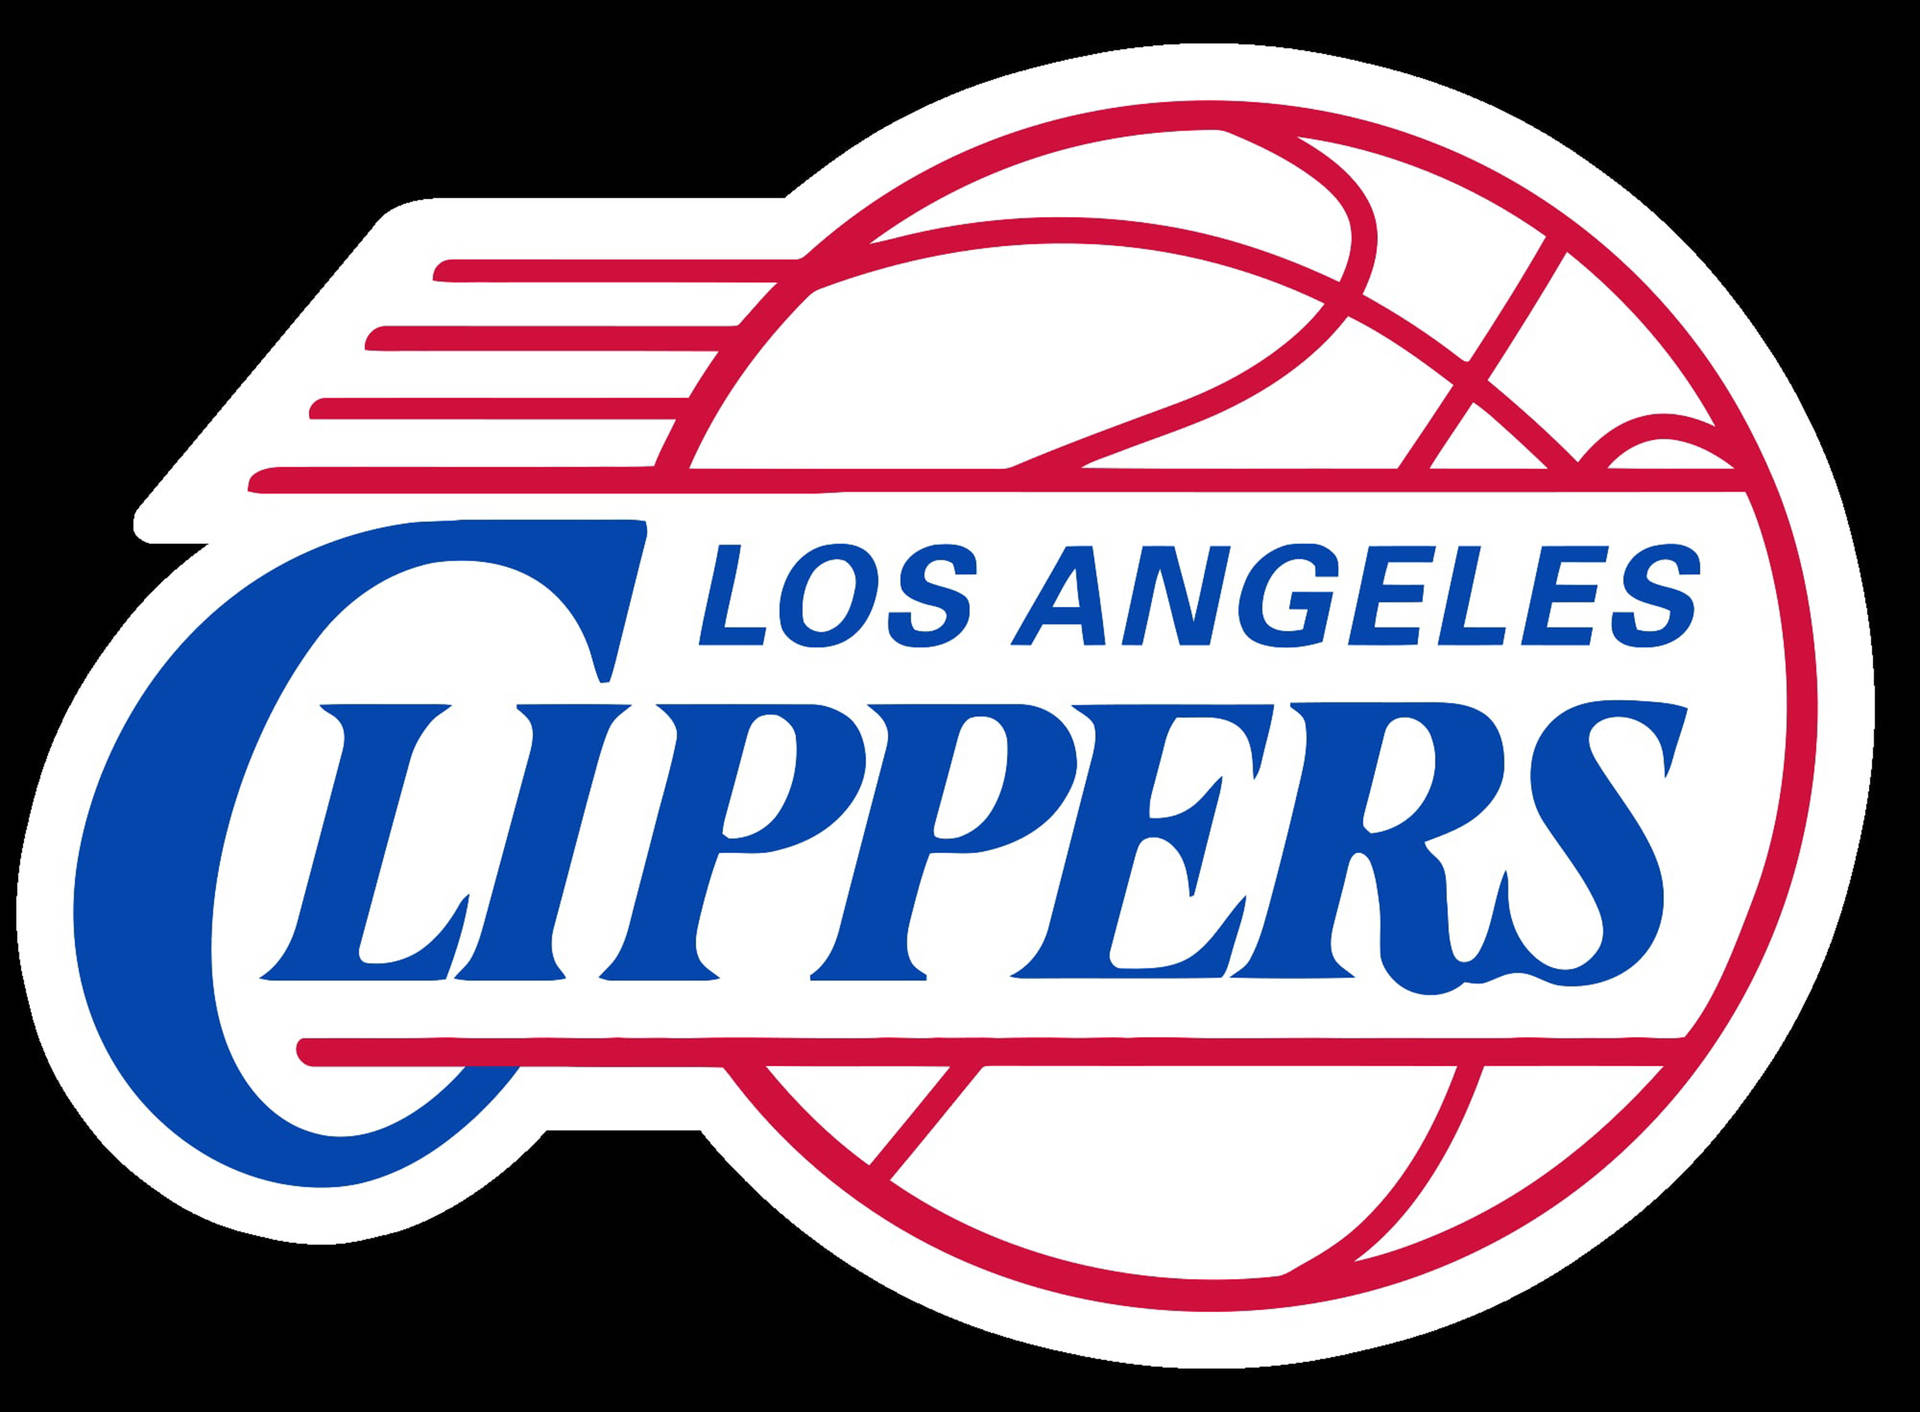 Los Angeles Clippers 2010 Black Background Background